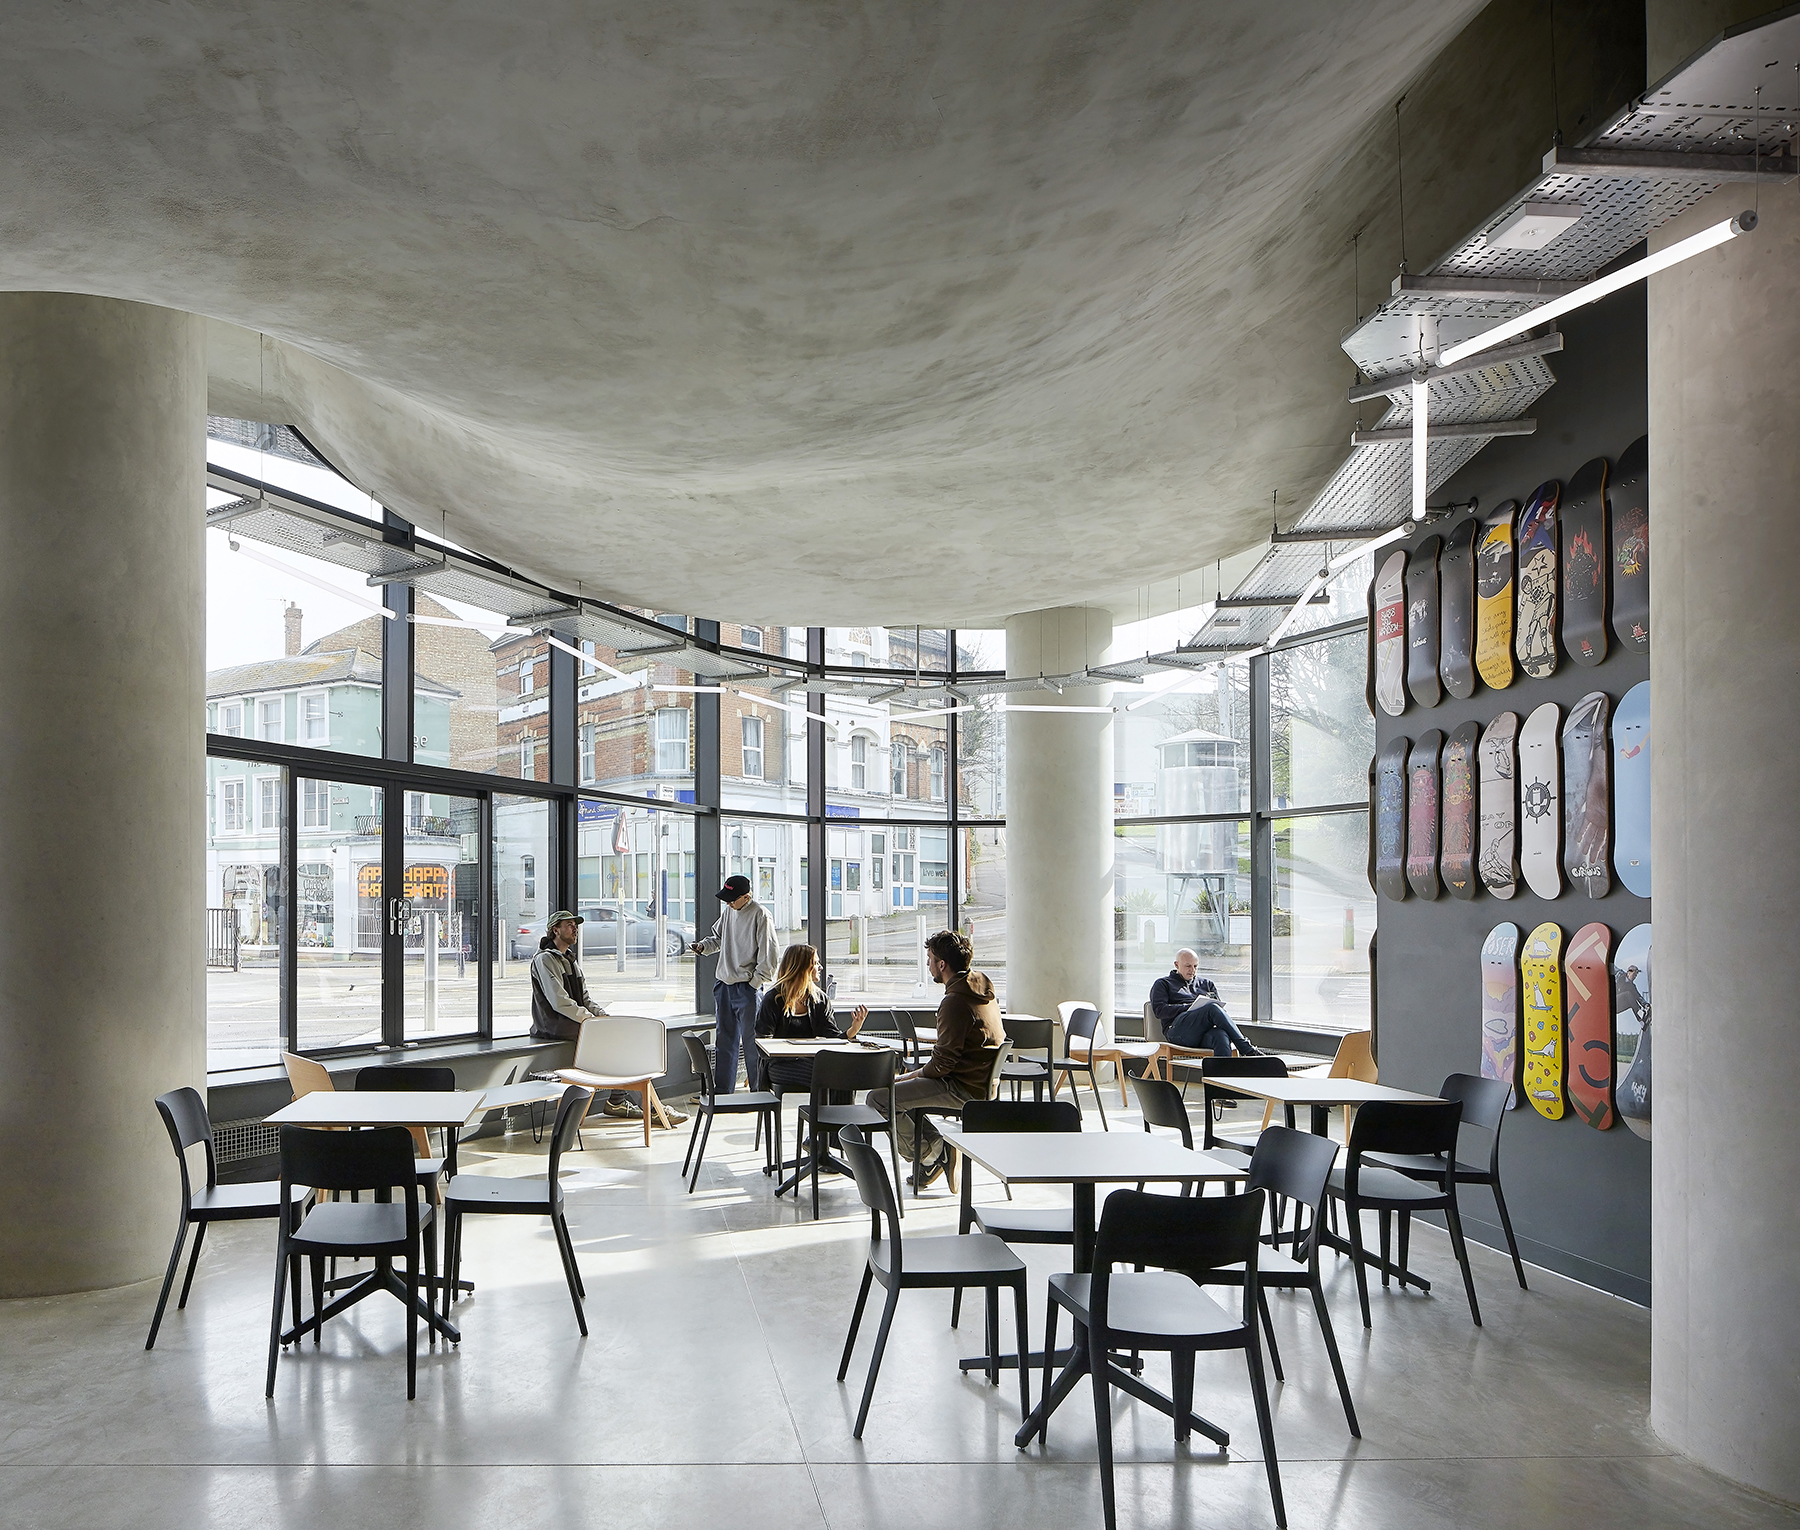 cafe with ceiling showing underside of skate bowls